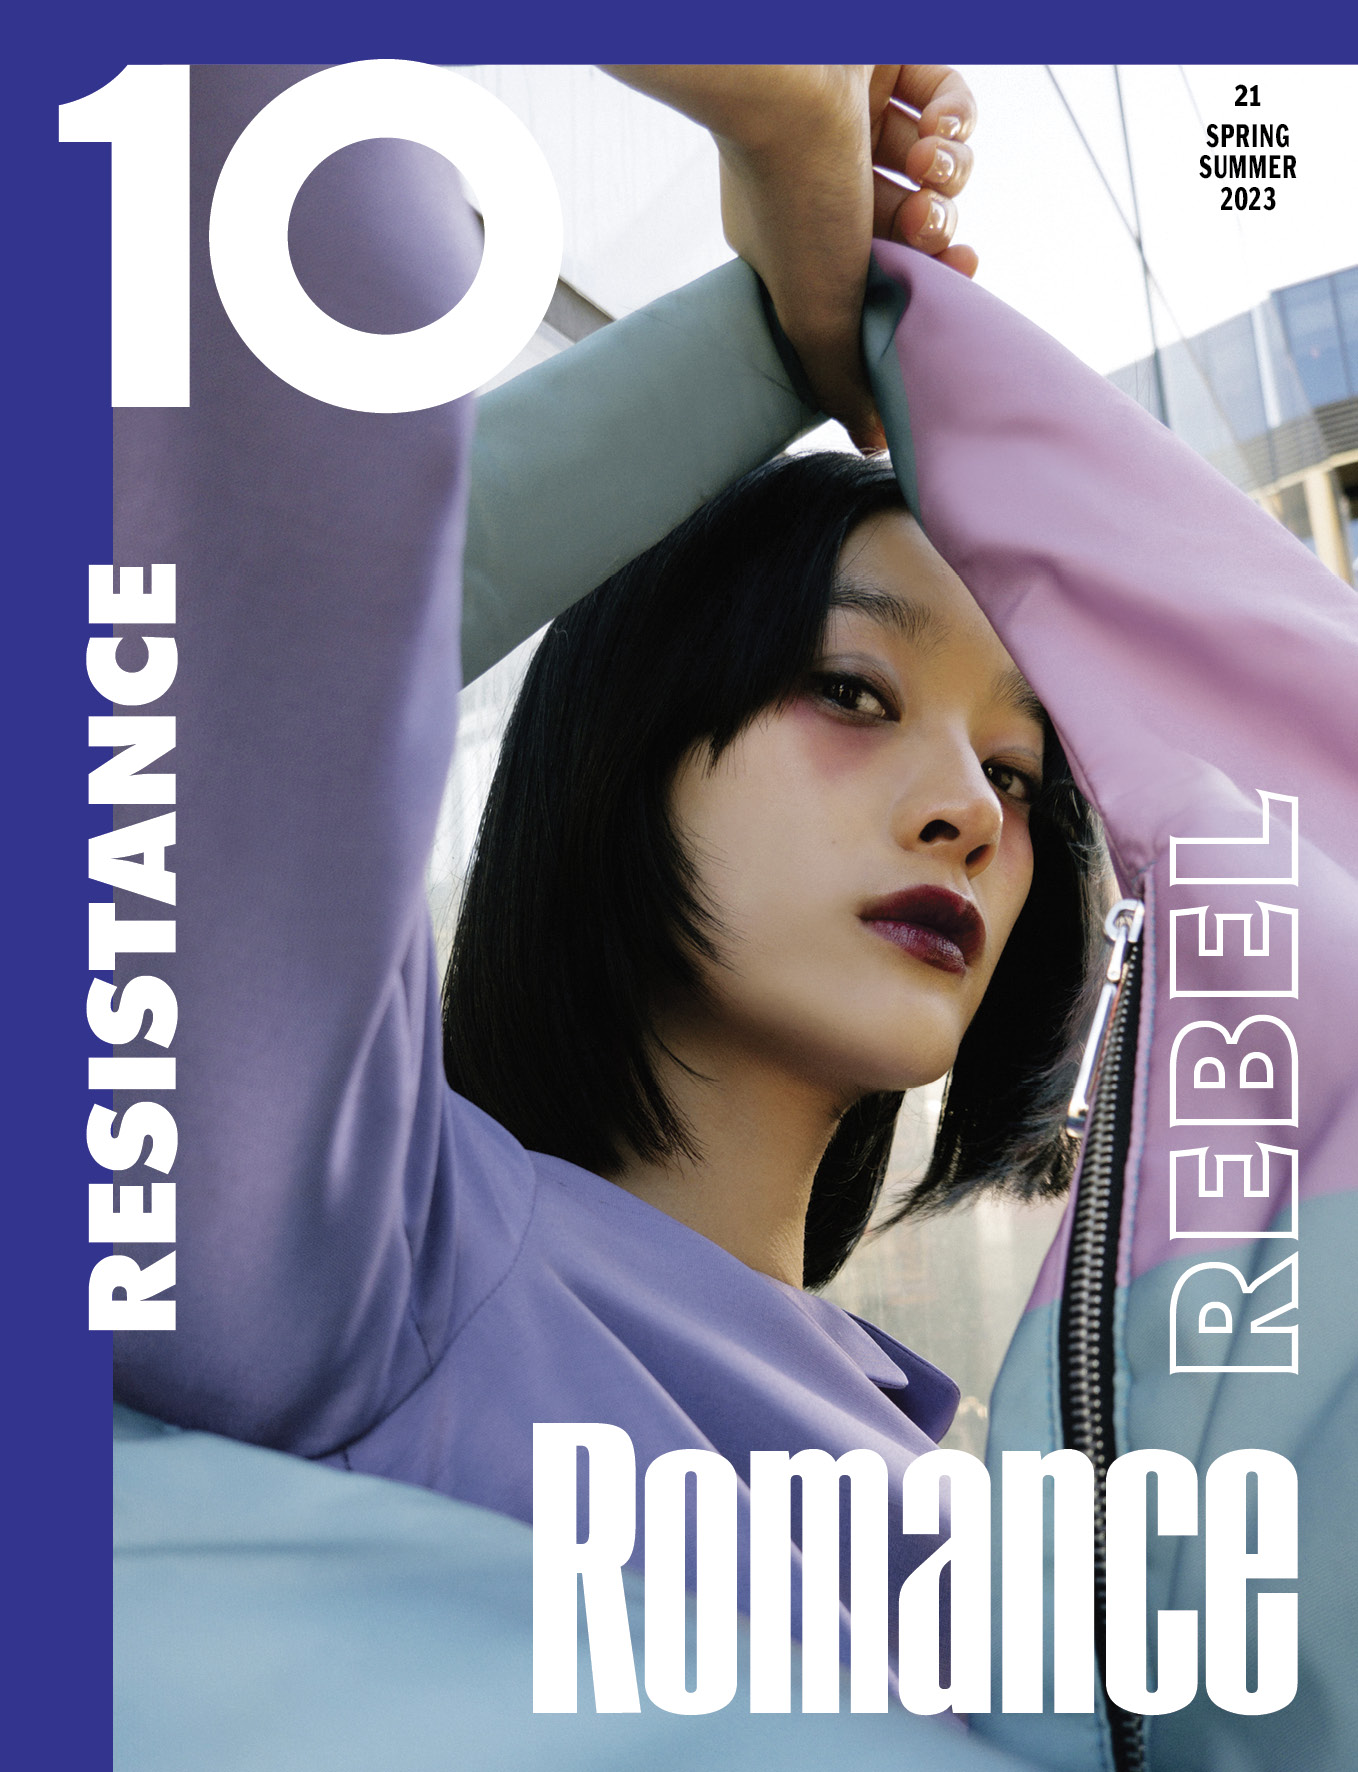 Tapestry-soho-frith-street-london-publishing-production-house-agency-10-magazine-australia-edition-issue-spring-summer-publication-reprographics-2023-covers-photography-dynamic-creative-throwback